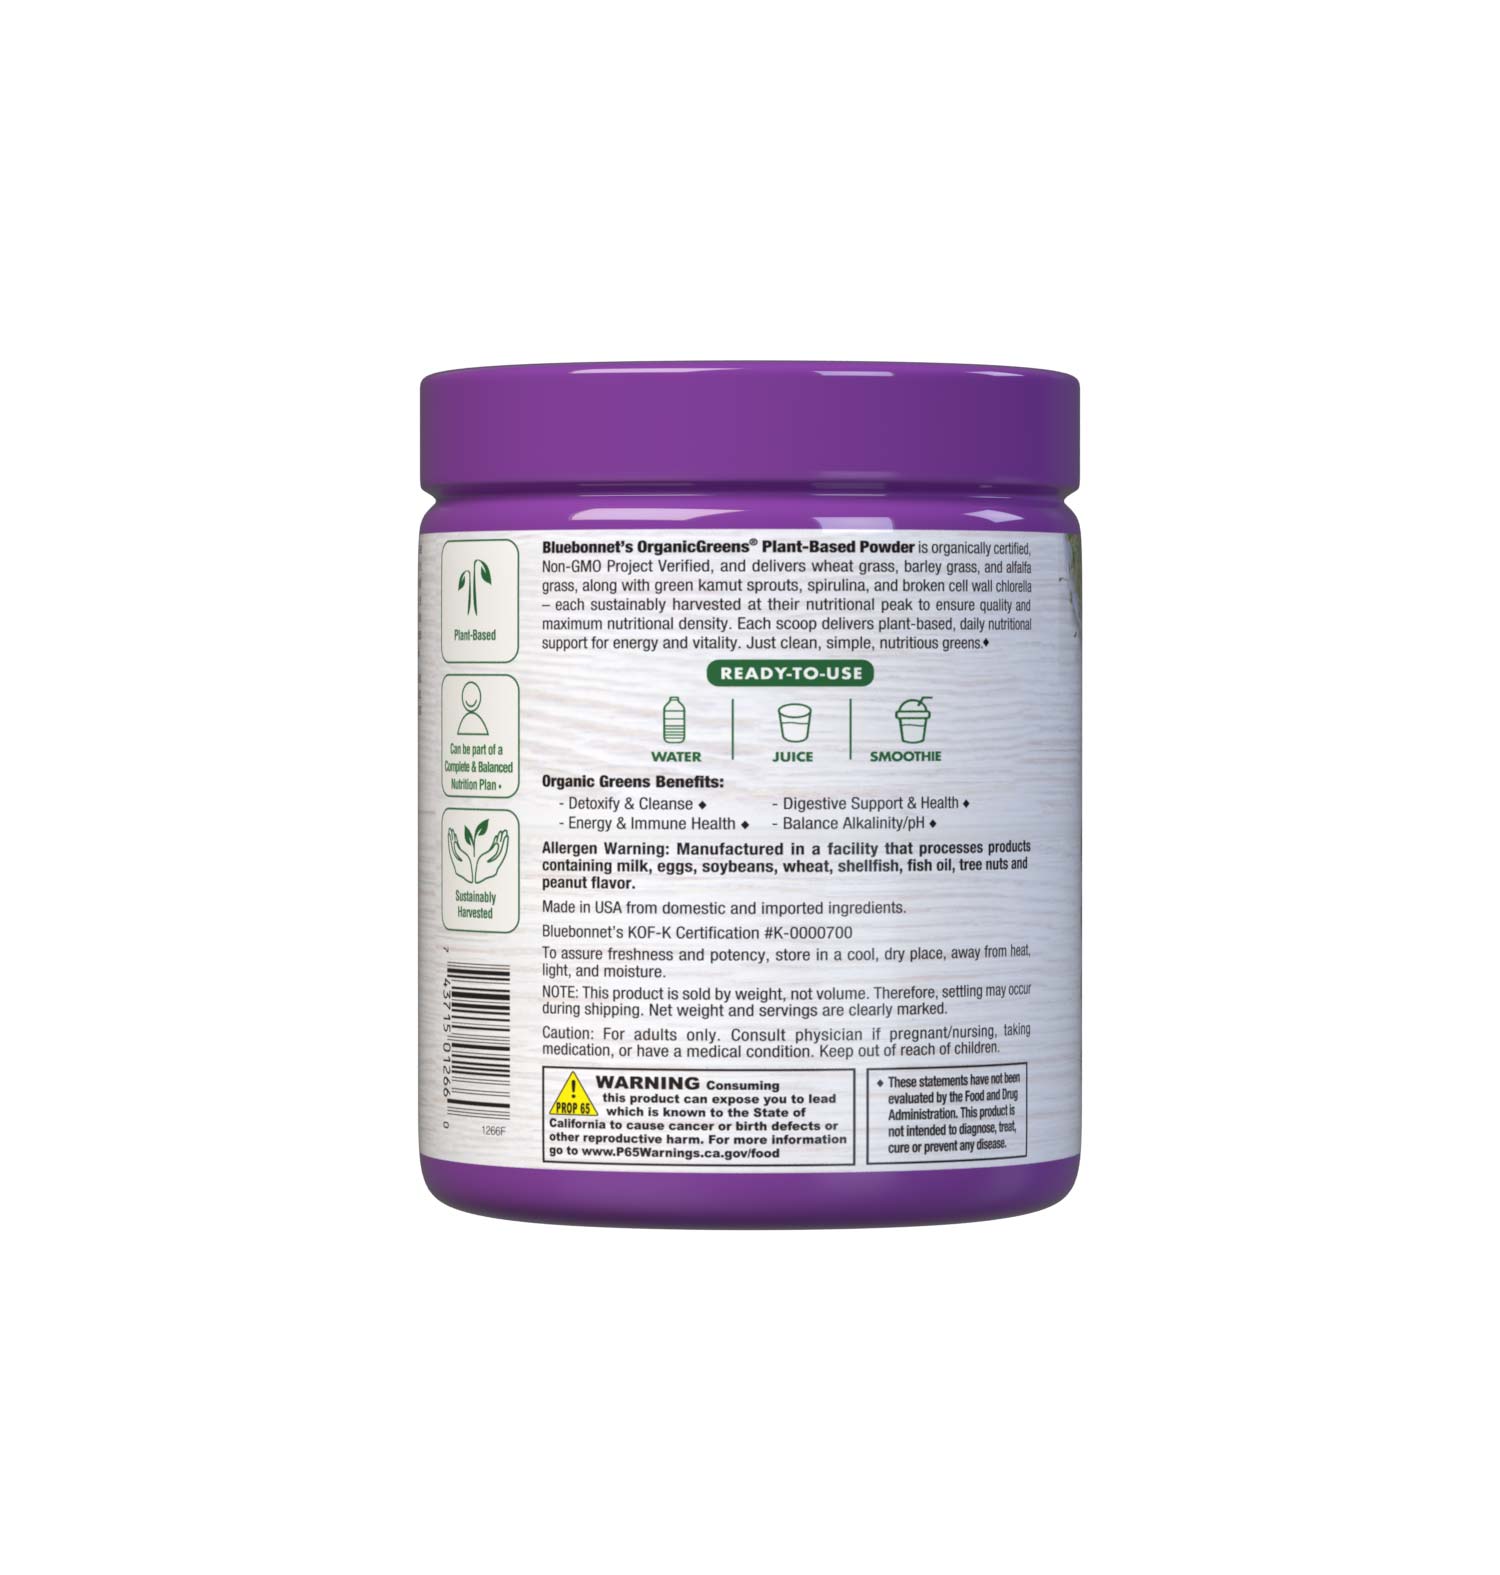 Bluebonnet’s OrganicGreens are the perfect addition to any healthy diet, providing the opportunity to meet the recommended five servings per day of fruits and vegetables in one delicious scoop. Description panel. #size_7.4 oz